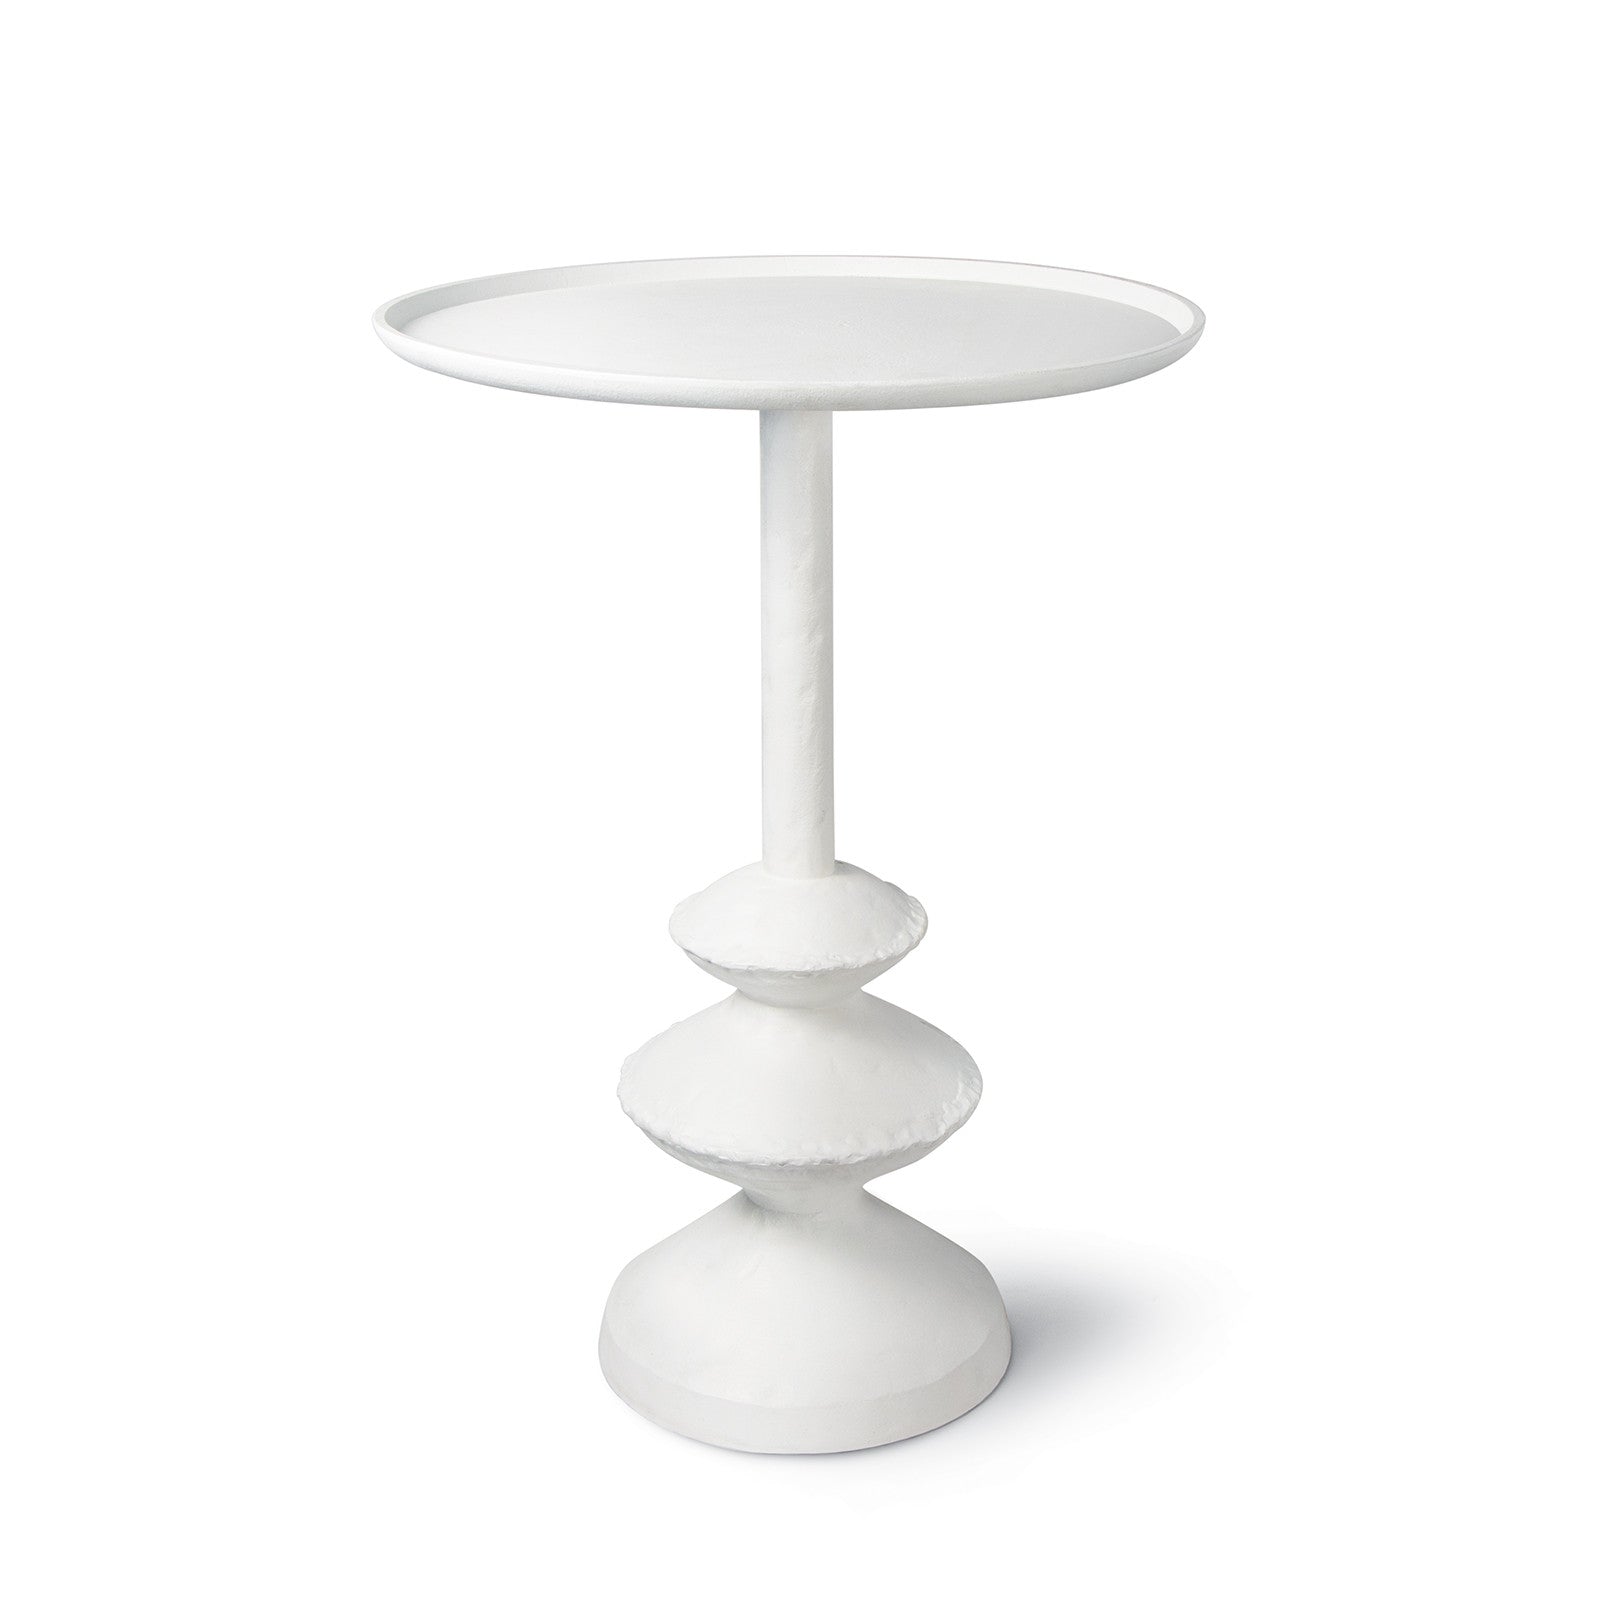 We love the unique base of this Hope Table. The matte white finish gives it clean look and would complete the look for any living room, bedroom, or other space.   Size: 16"w x 16"d x 24"h 